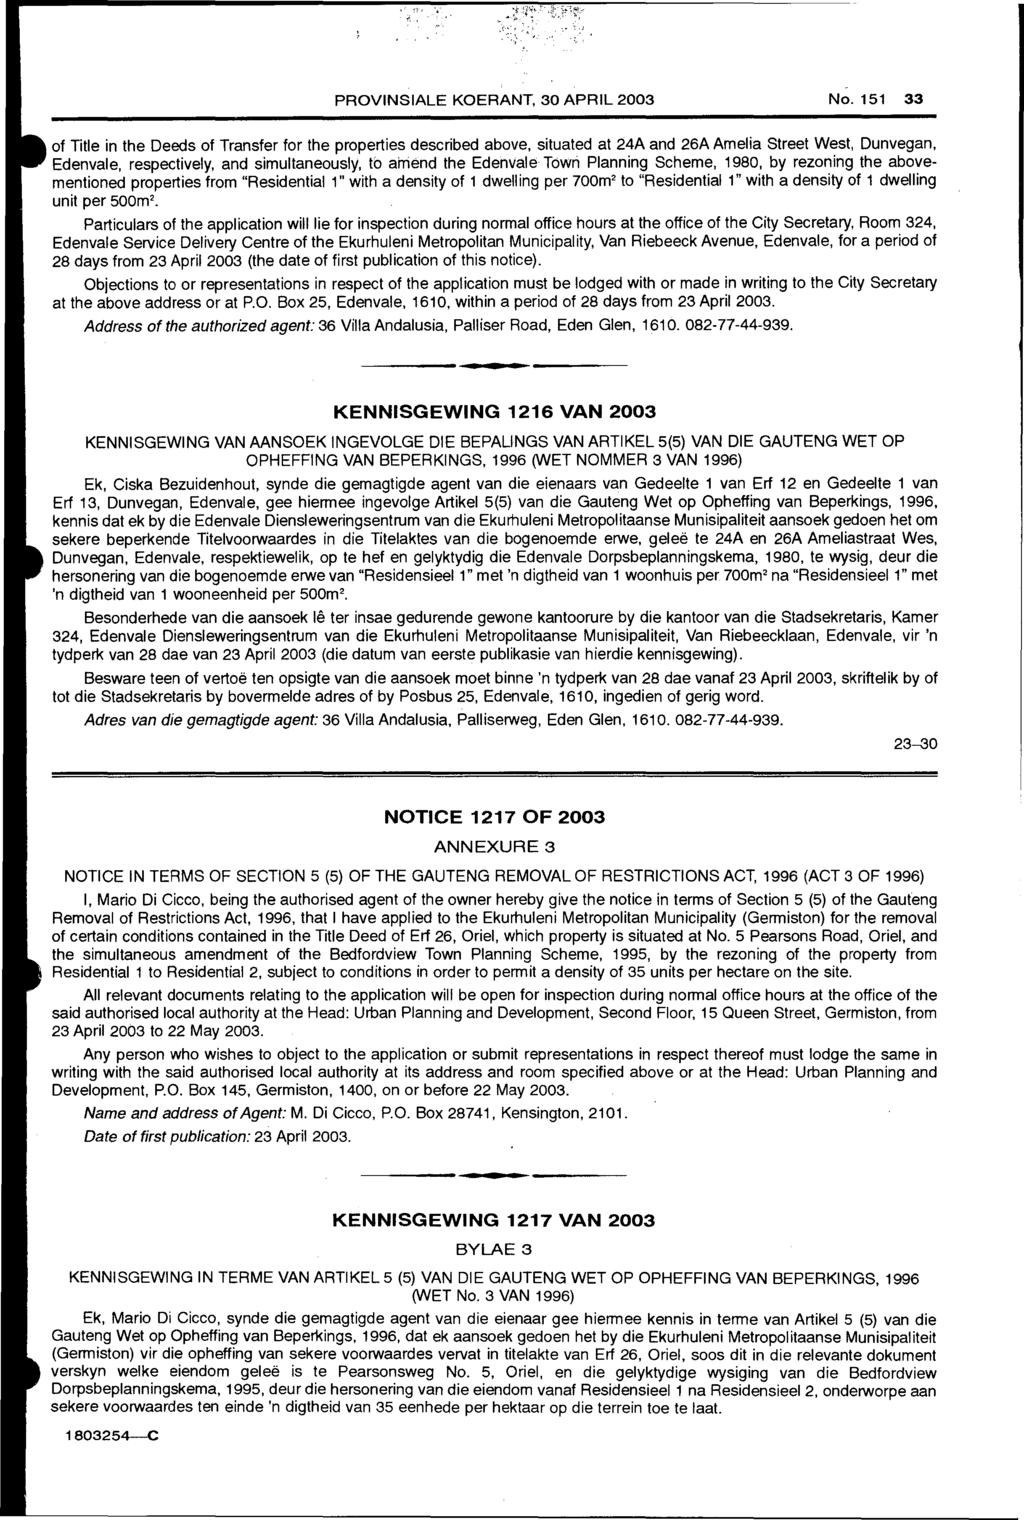 i.' PROVINSIALE KOERANT, 30 APRIL 2003 No. 151 33 of Title in the Deeds of Transfer for the properties described above.